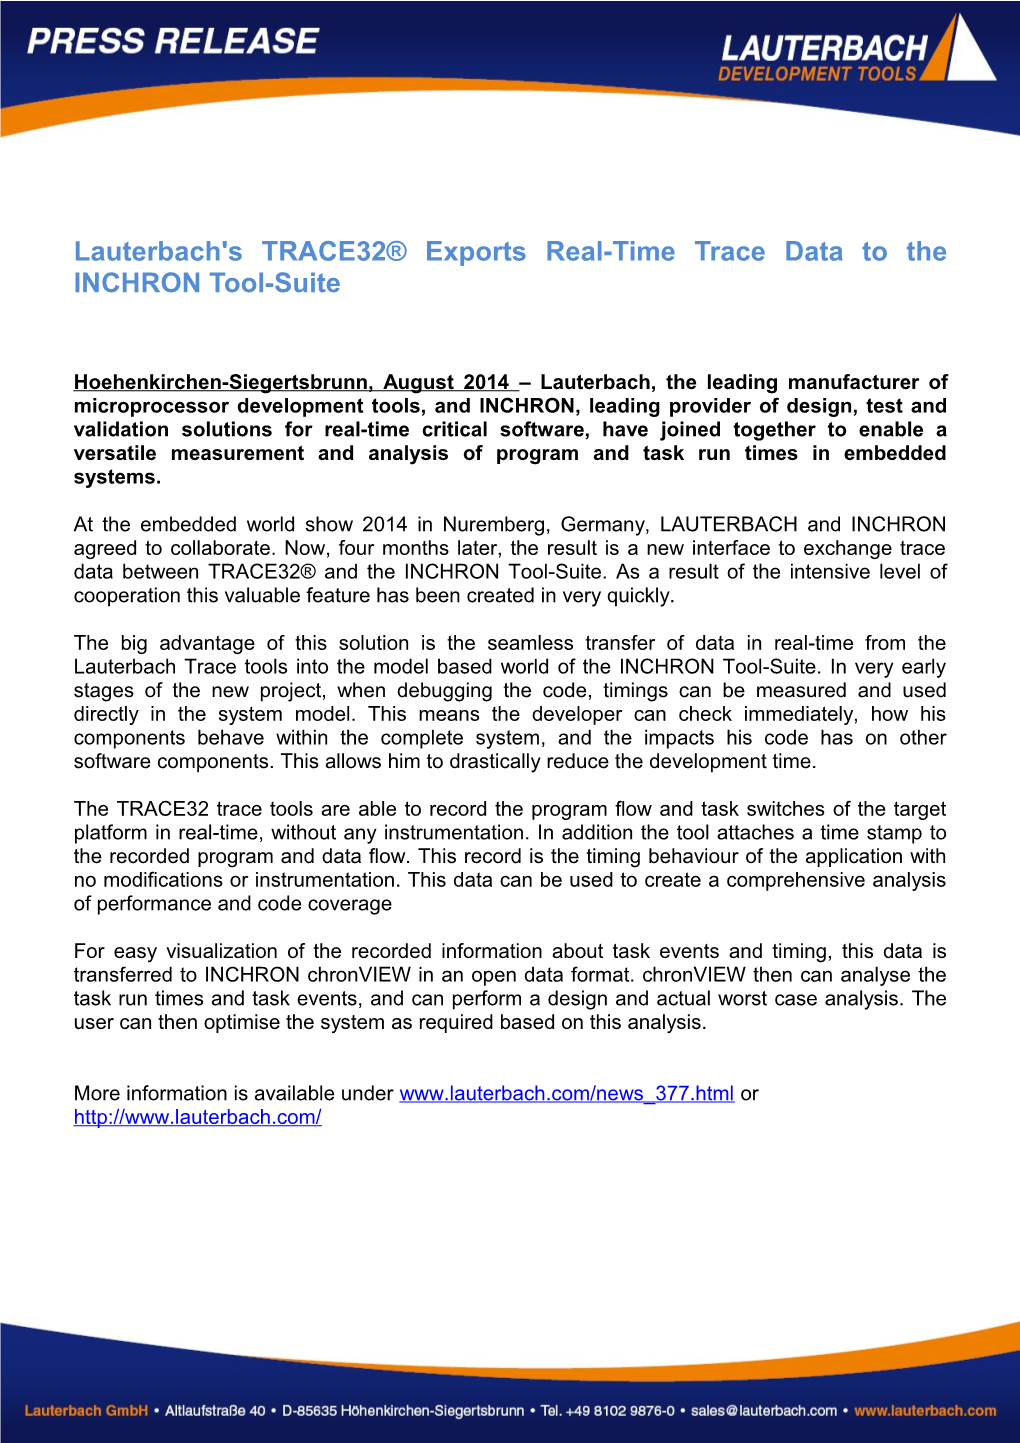 Lauterbach's TRACE32 Exports Real-Time Trace Data to the INCHRON Tool-Suite